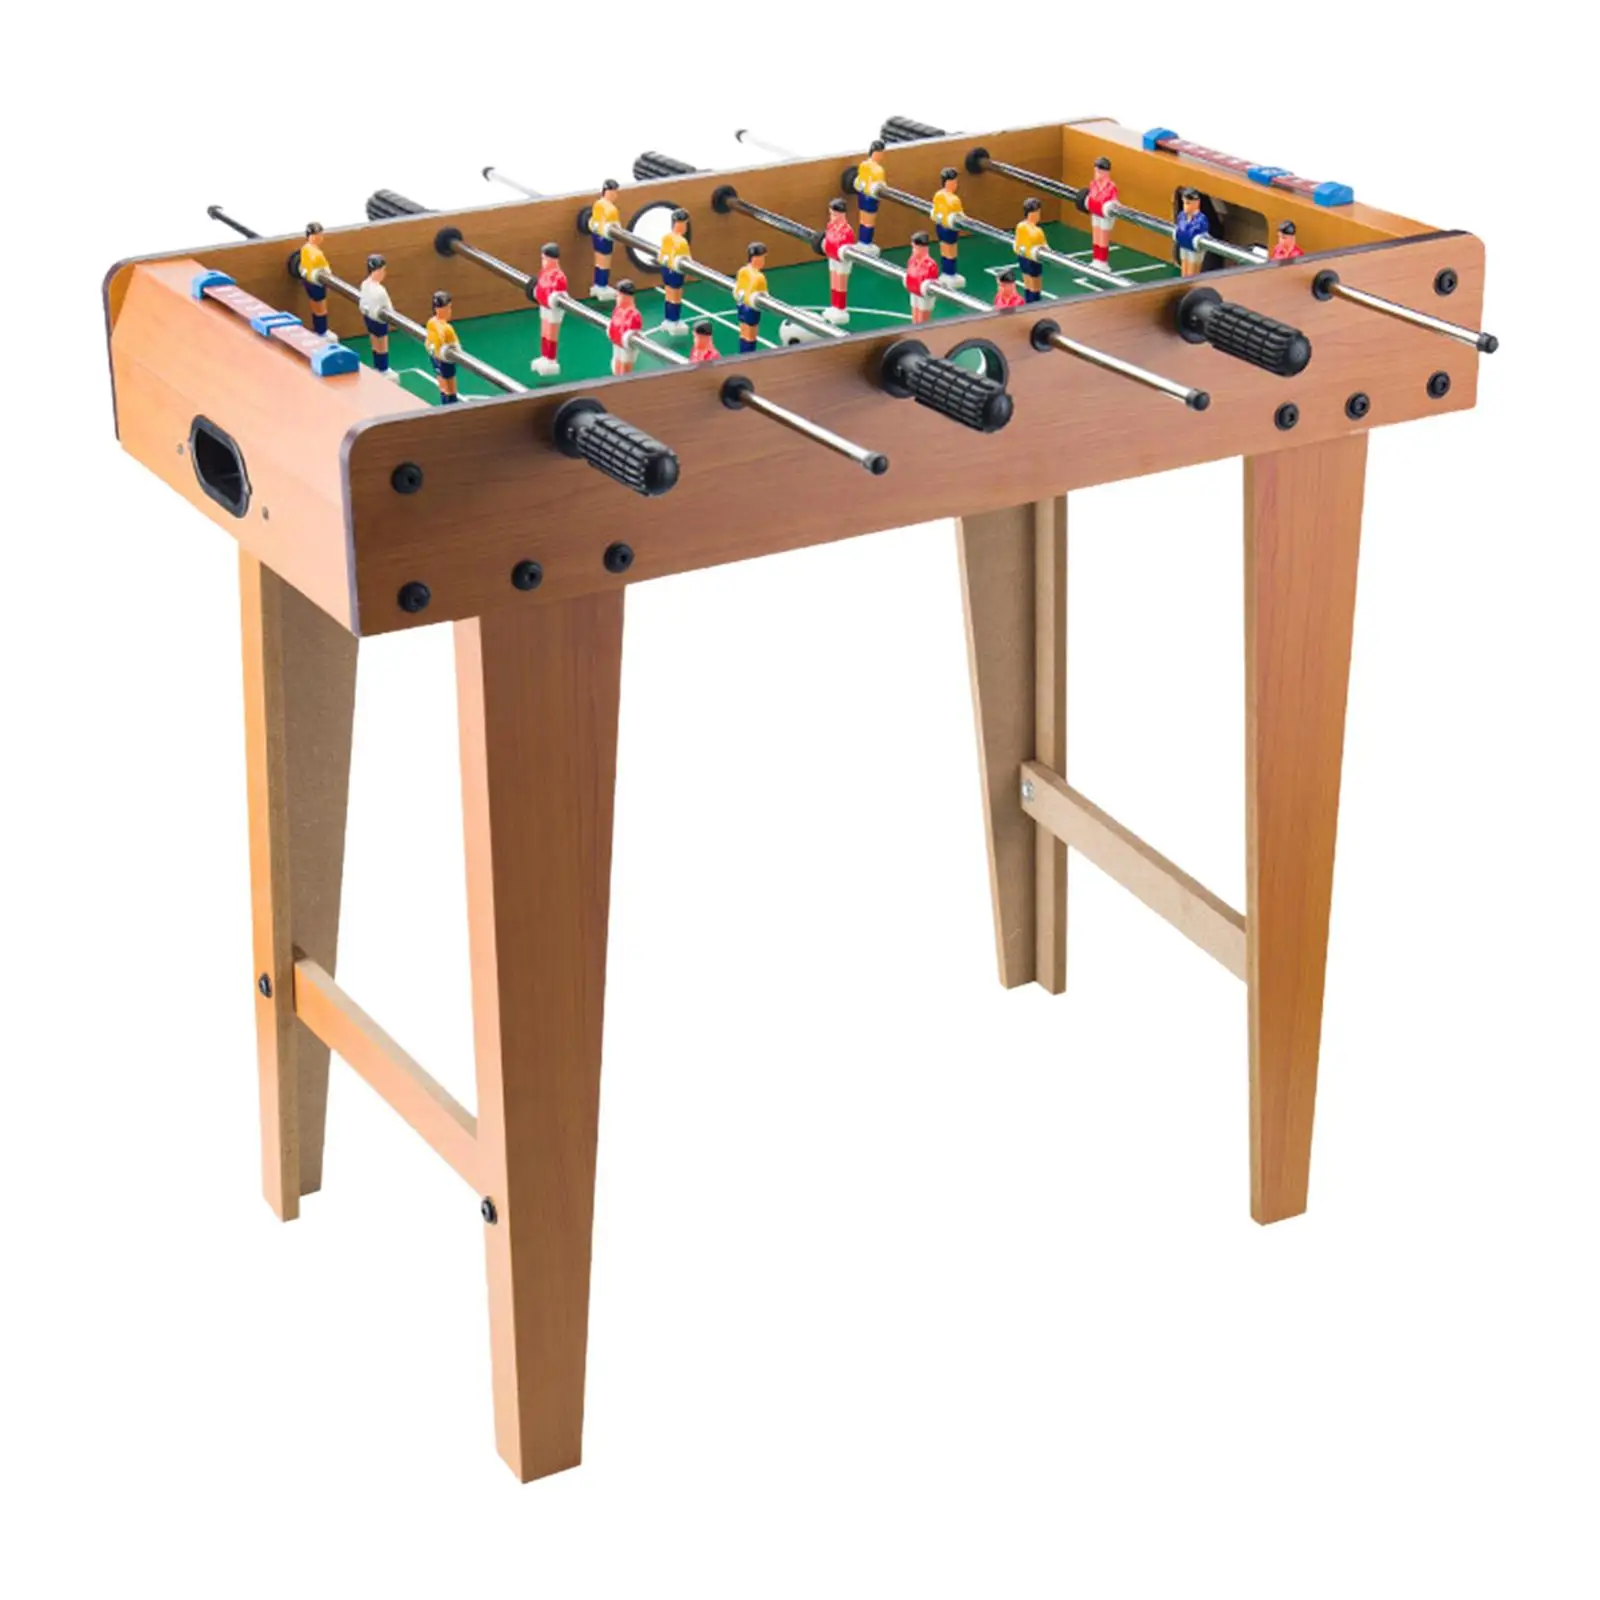 Wooden Foosball Table with Ball Tabletop Football Soccer Game for Outdoor